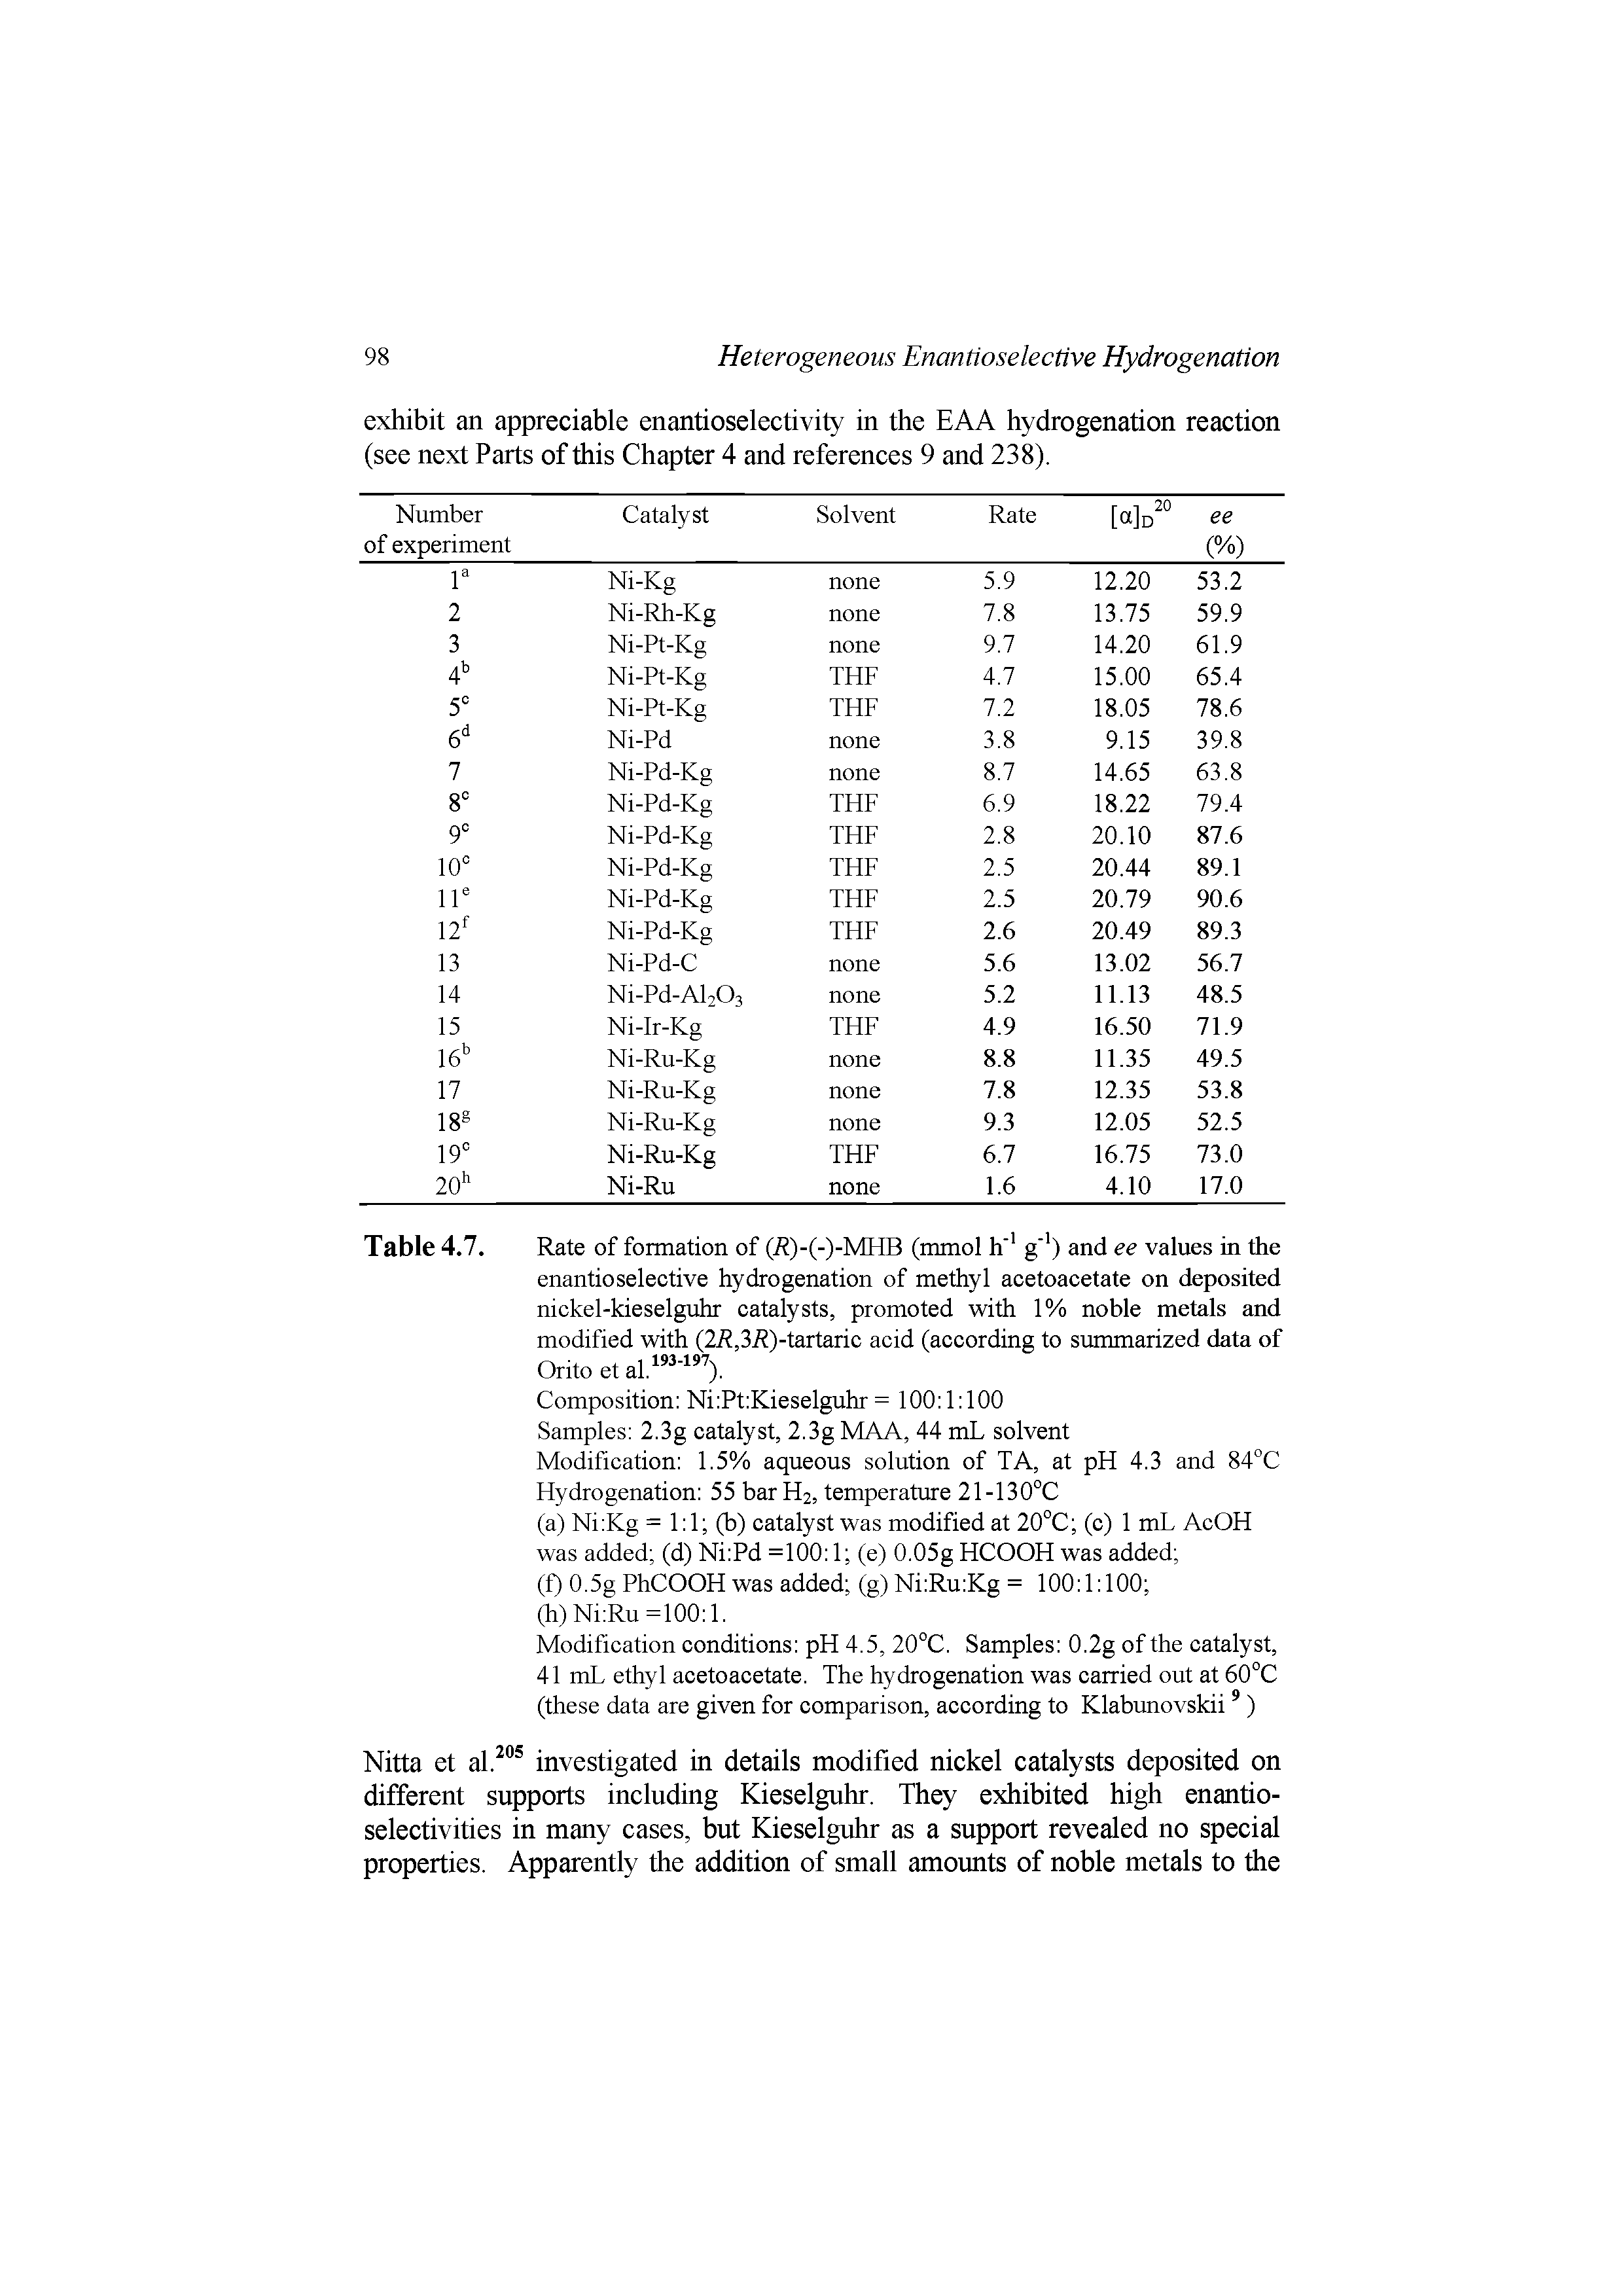 Table 4.7. Rate of formation of (R)-(-)-MHB (mmol h g ) and ee values in the enantioselective hydrogenation of methyl acetoacetate on deposited nickel-kieselguhr catalysts, promoted with 1% noble metals and modified with (2R,3R)-tartaric acid (according to summarized data of Orito et al. ).